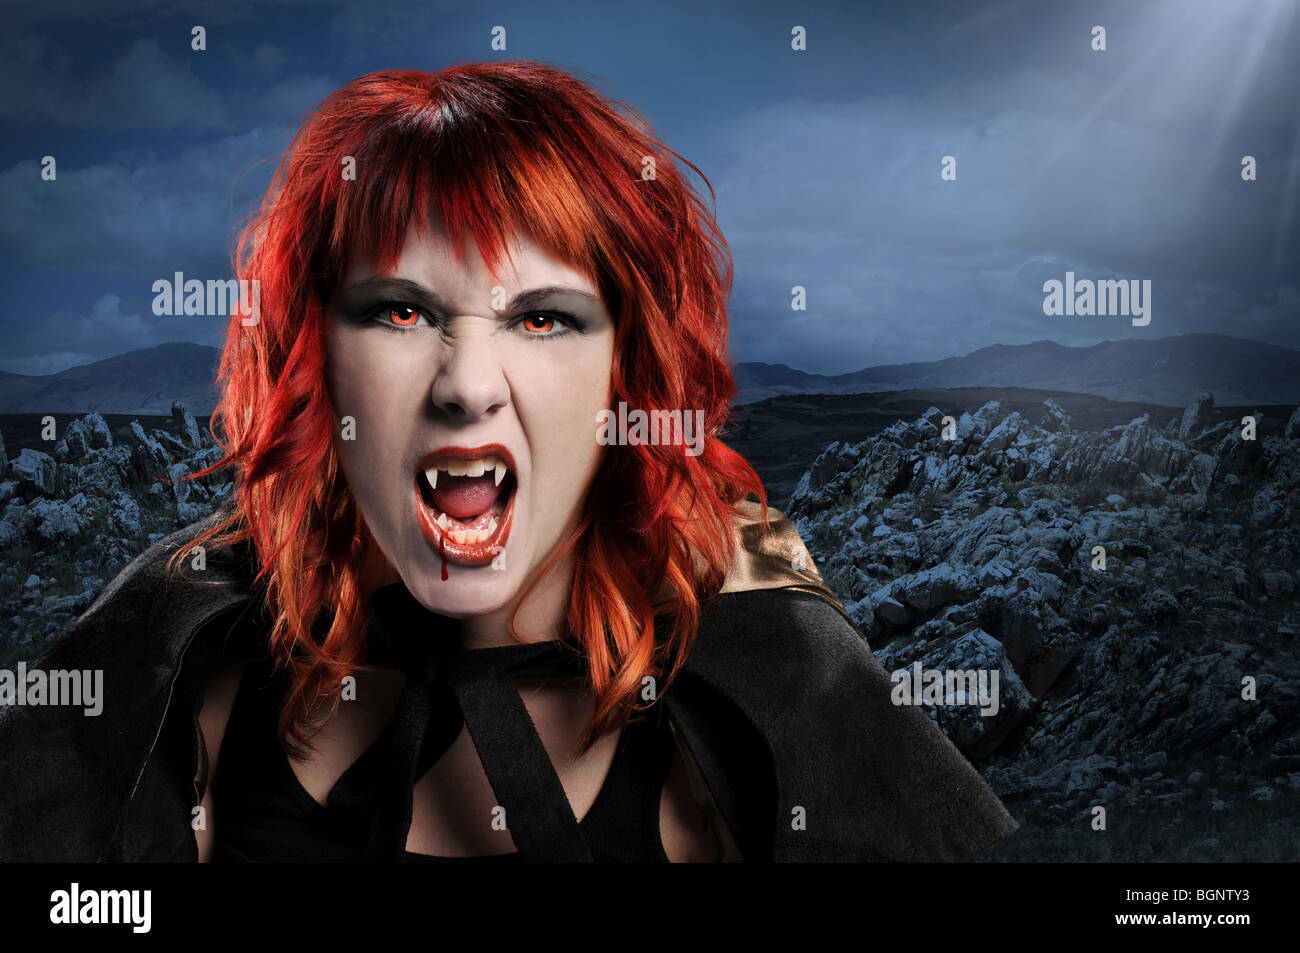 Vampire woman hissing over a night landscape Stock Photo